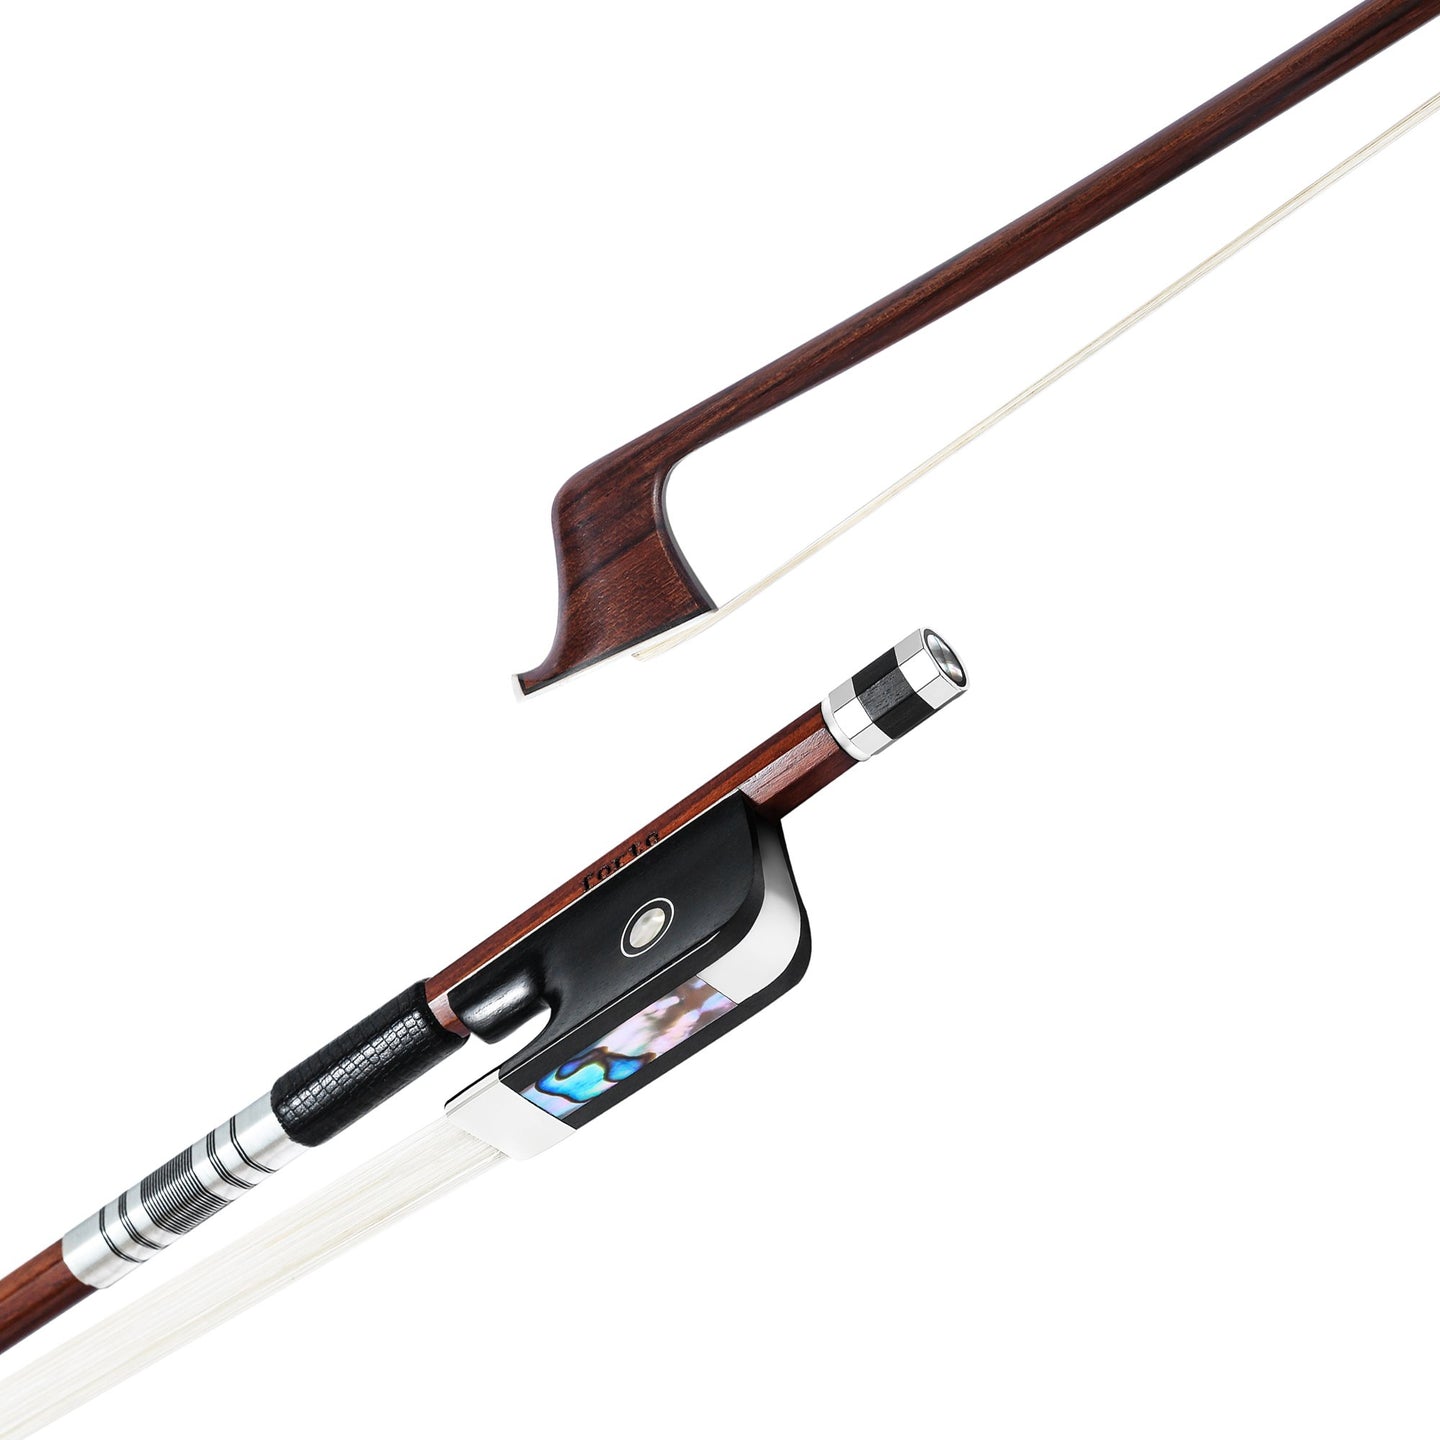 Forte Pro select Brazilwood cello bow tip and fully-mounted Ebony frog side view, featuring round stick, Nickel Silver winding, Parisian eye, Abalone slide and white horsehair